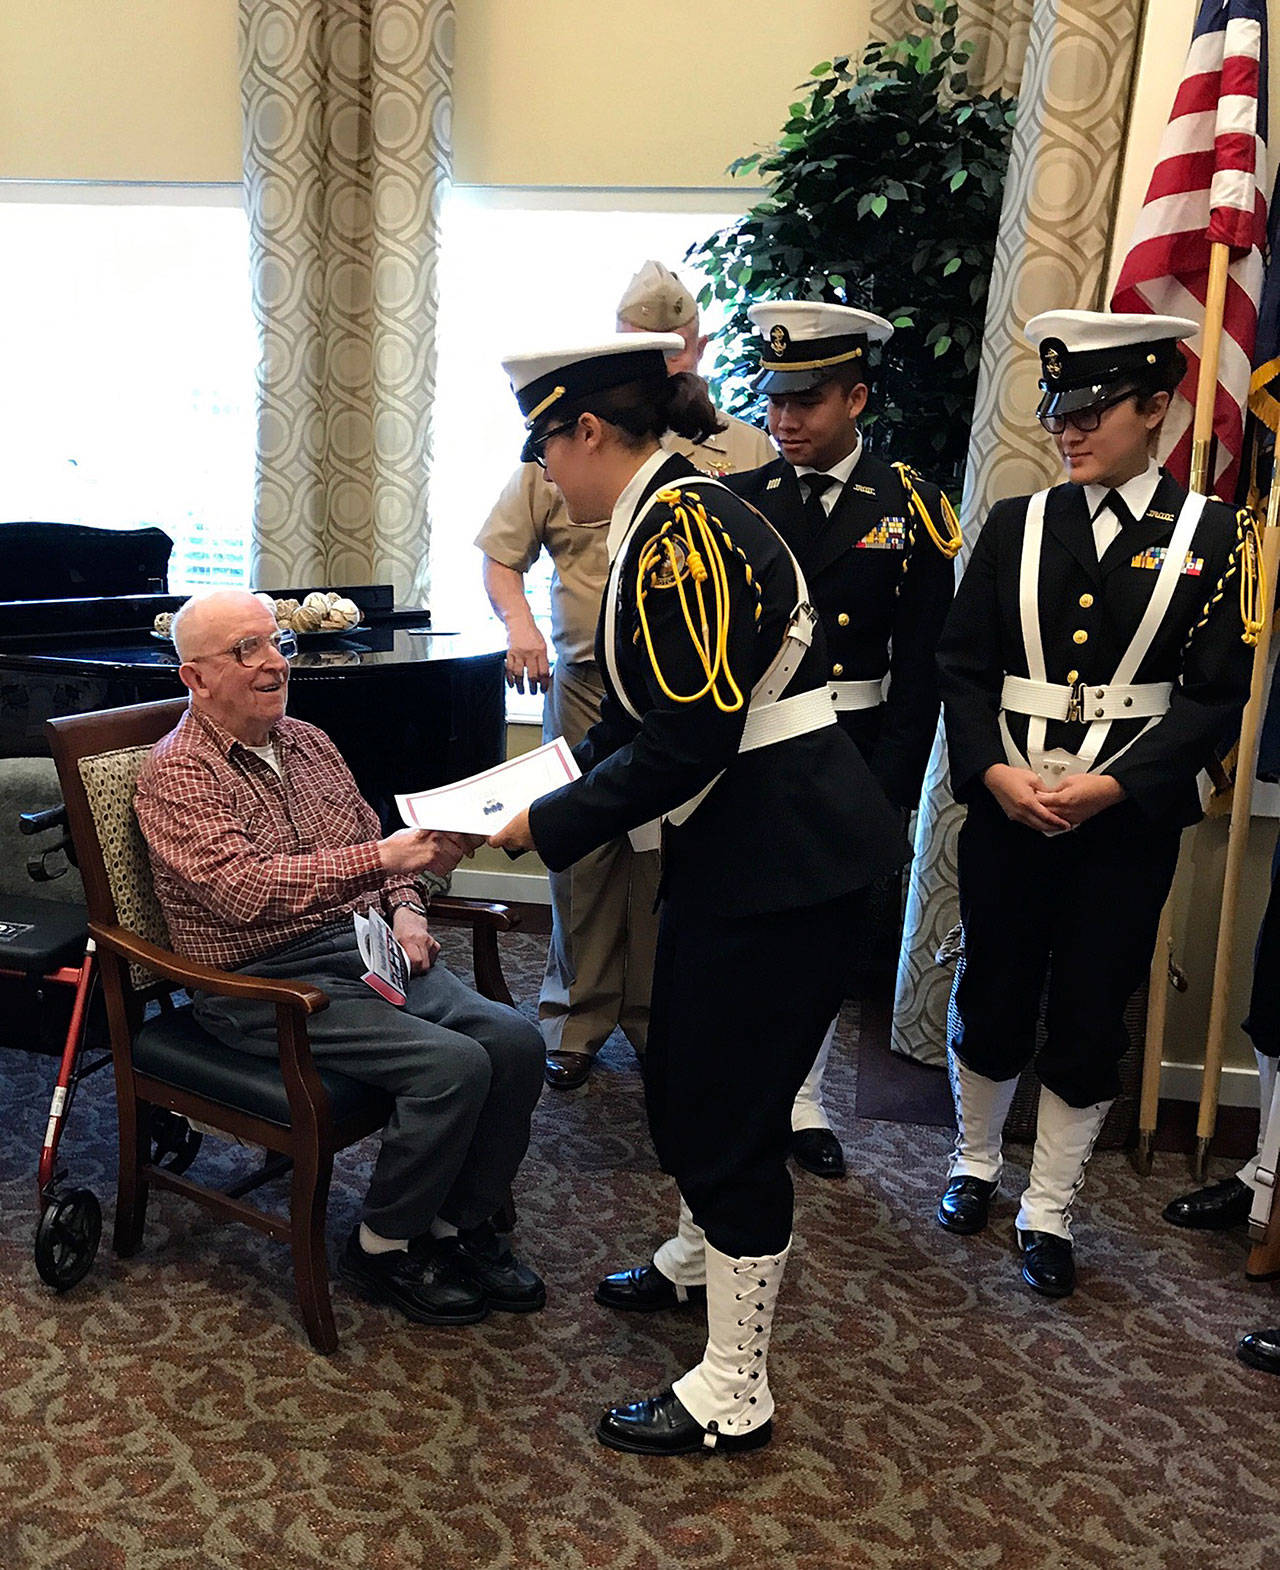 The Everett High School Navy Junior ROTC presents U.S. Army veteran Robert “Bob” Erickson with a certificate of appreciation during a visit to Brookdale Everett in honor of Veterans Day. (Contributed photo)